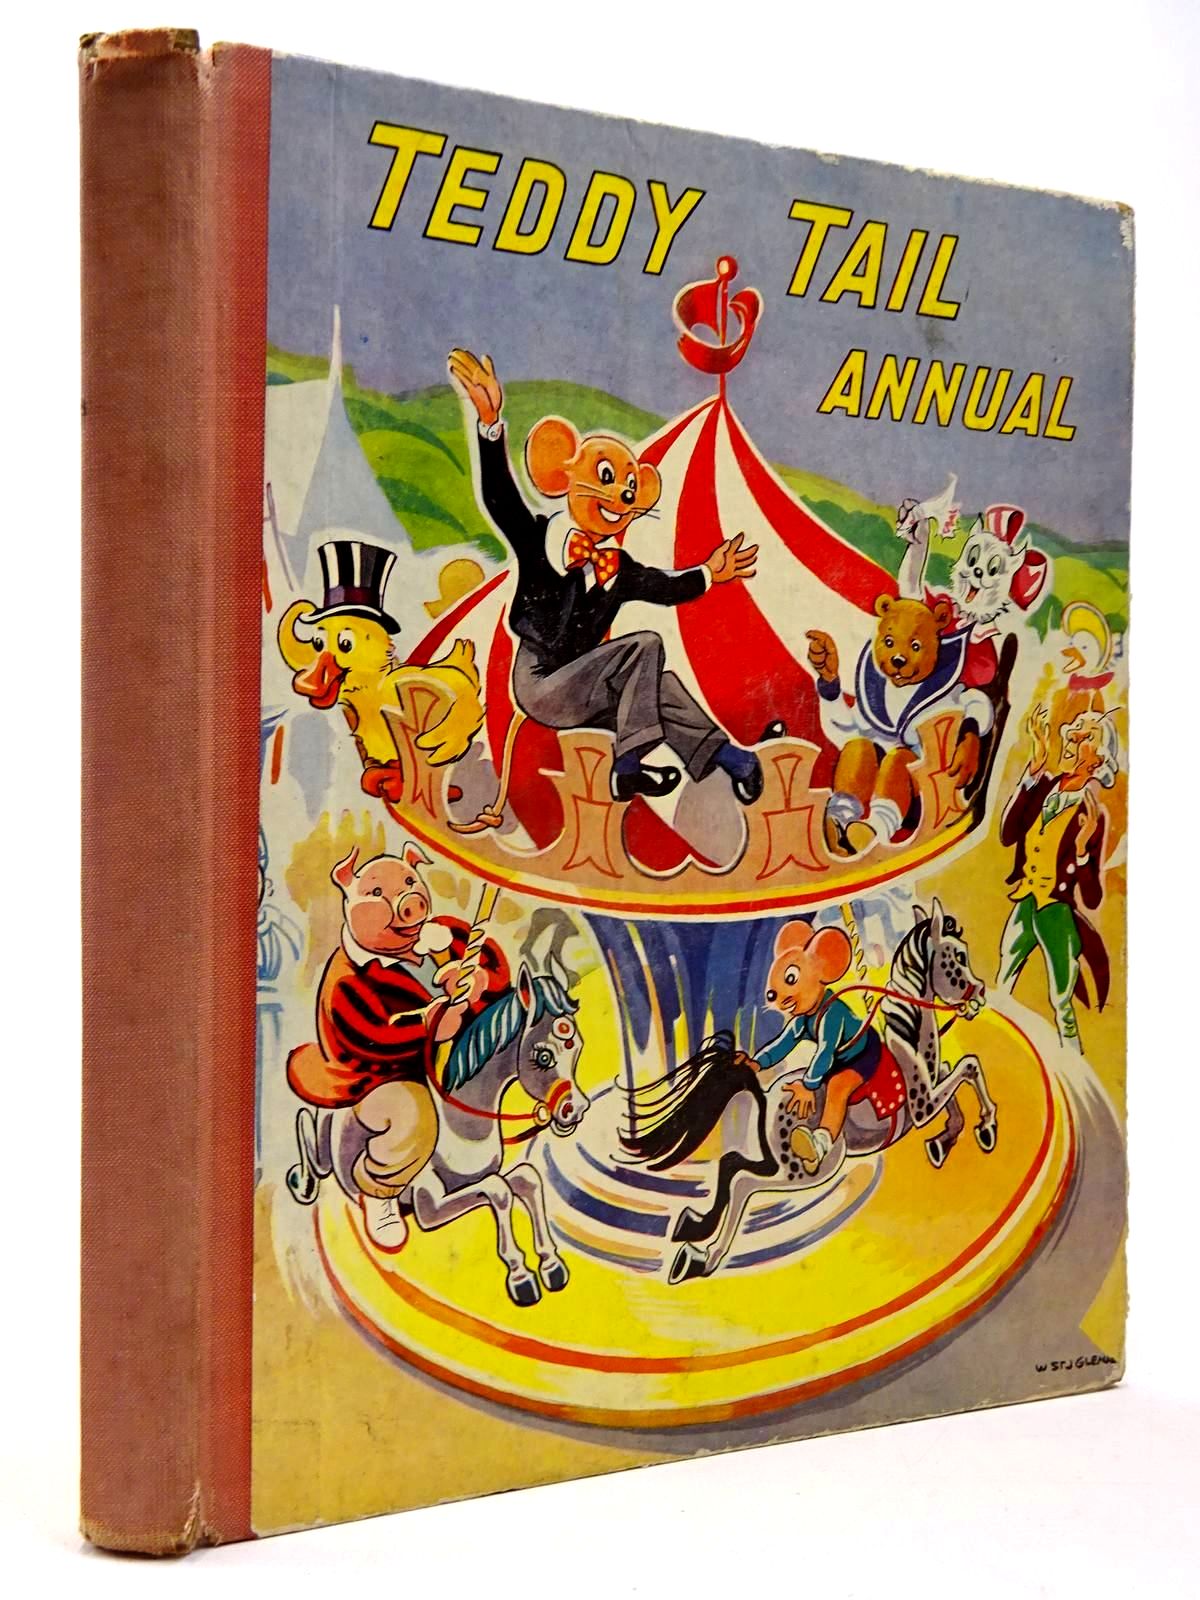 Photo of TEDDY TAIL ANNUAL published by Juvenile Productions Ltd. (STOCK CODE: 2130322)  for sale by Stella & Rose's Books